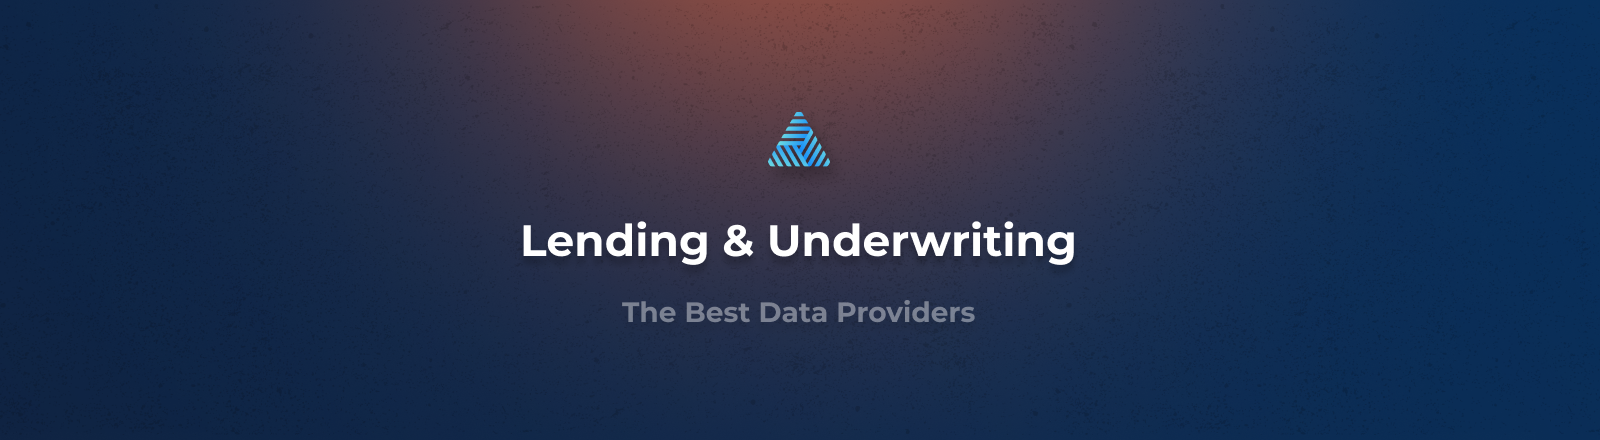 The Best Data Providers for Lending & Underwriting Decisions